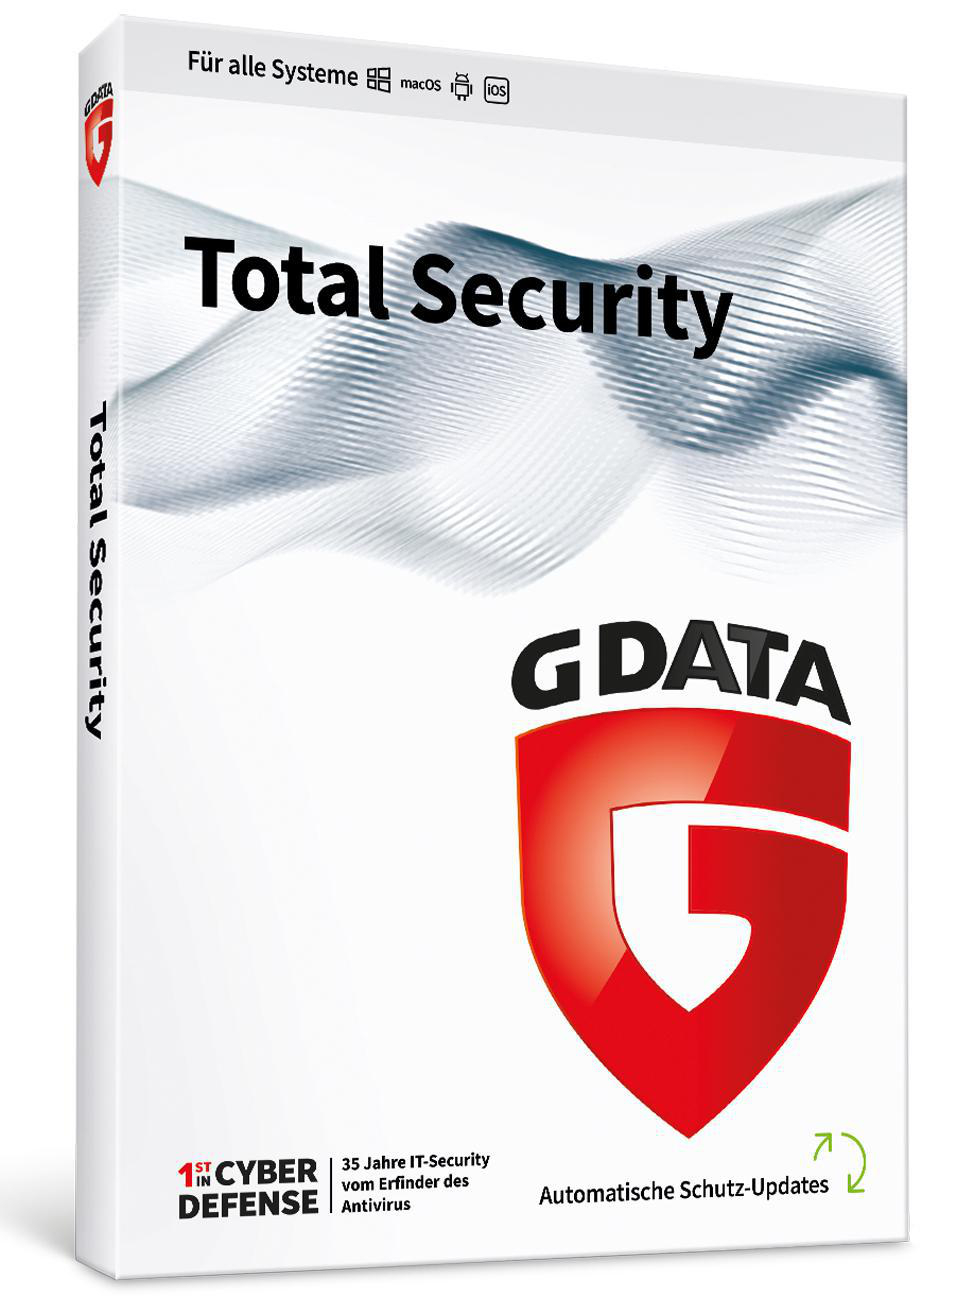 G DATA PC 3 - Total Security [PC]